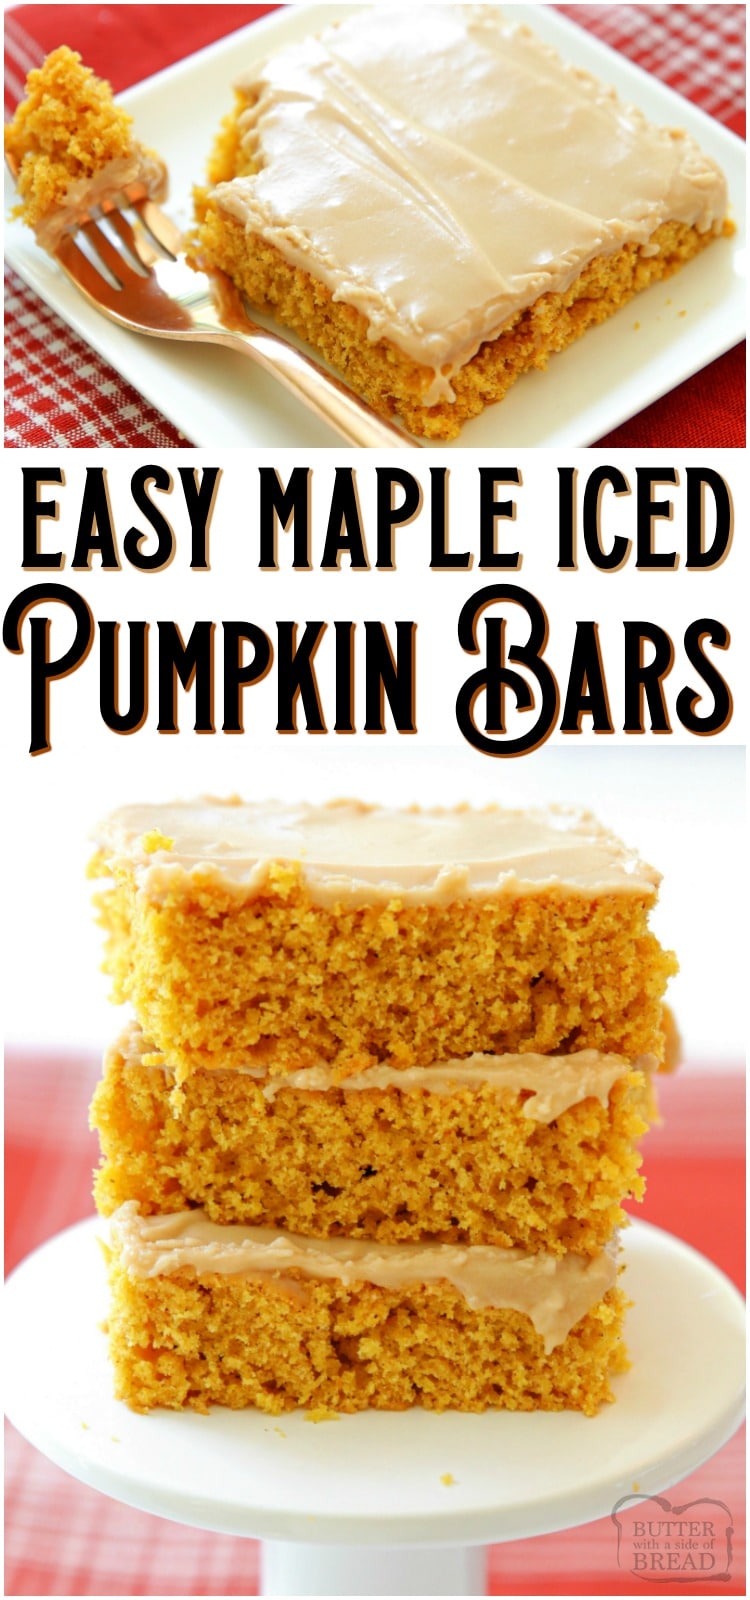 Maple Iced Pumpkin Bars are soft, sweet dessert bars loaded with Fall flavors. These easy baked spiced pumpkin bars are covered with a cream cheese maple icing that tastes heavenly! #pumpkin #baking #dessert #maple #creamcheese #frosting #Fall #recipe from BUTTER WITH A SIDE OF BREAD